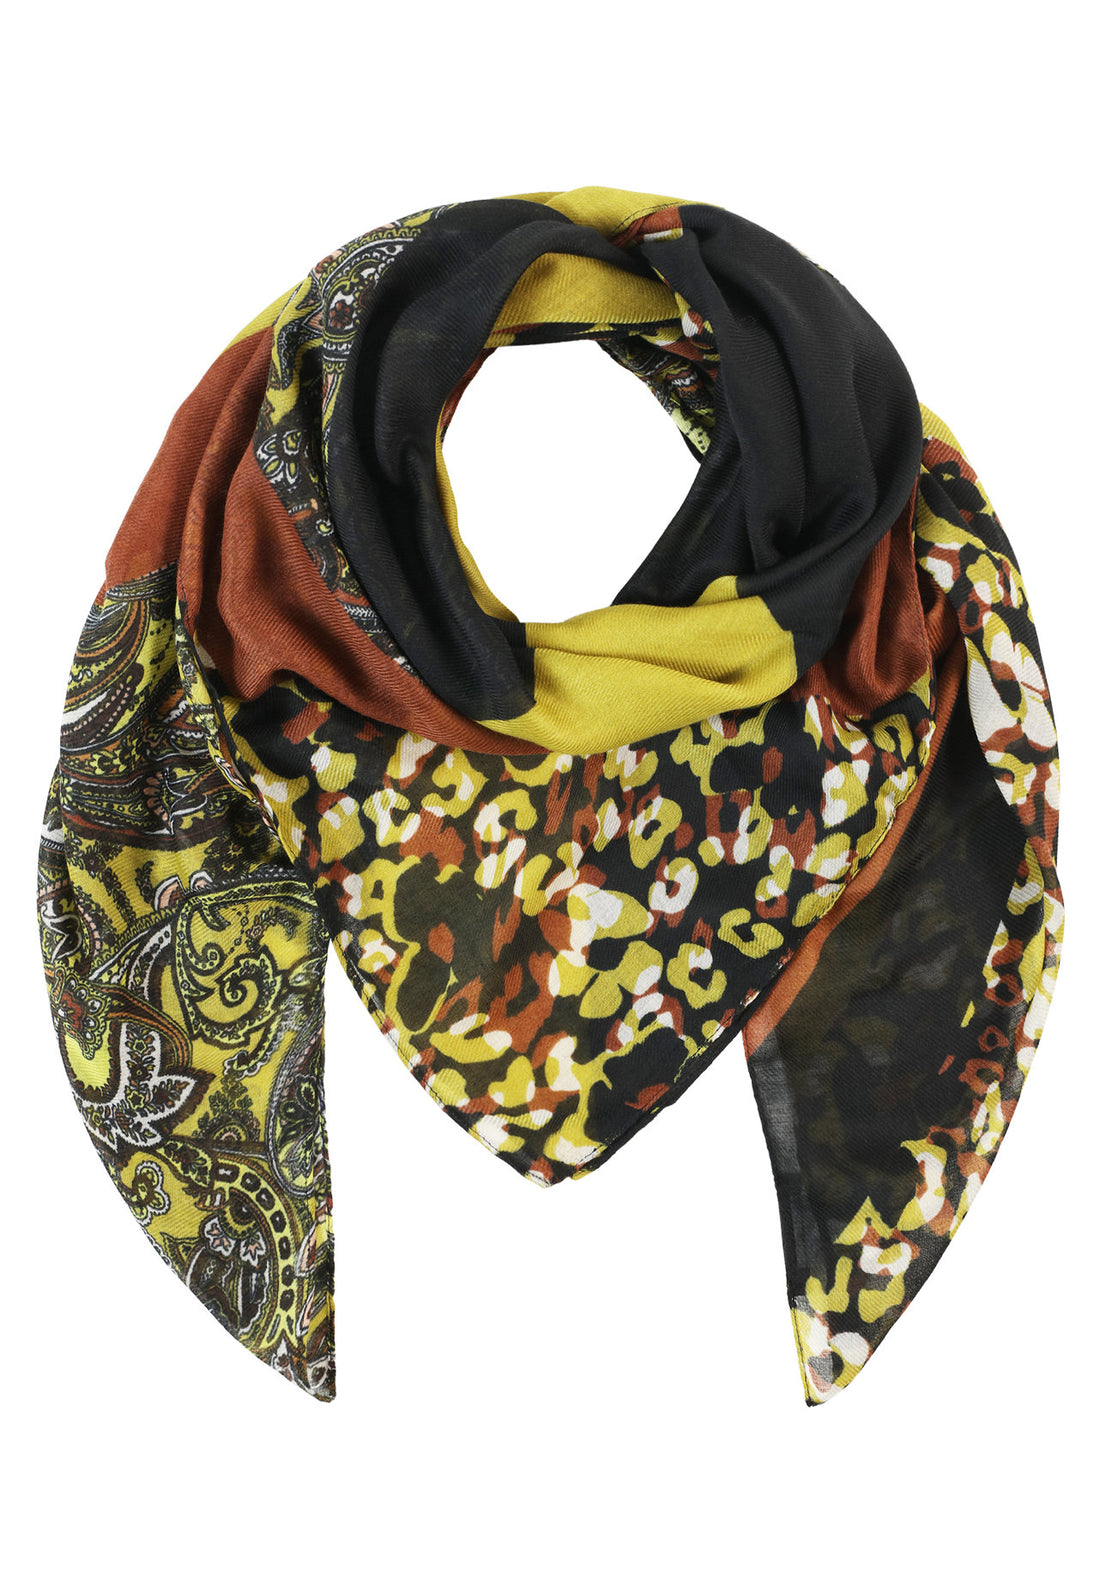 Scarf With All-Over Print_3376-2273_9820_01